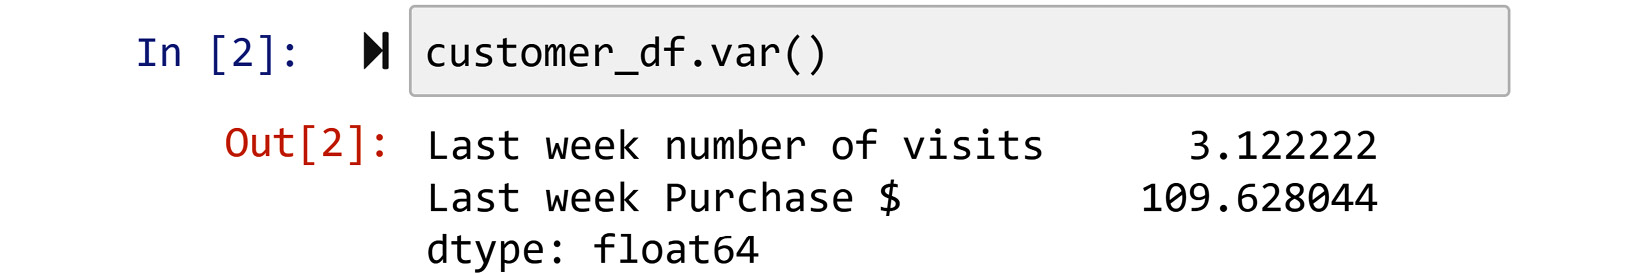 Figure 3.10  – Calculating the variance for the numerical attributes of customer_df
